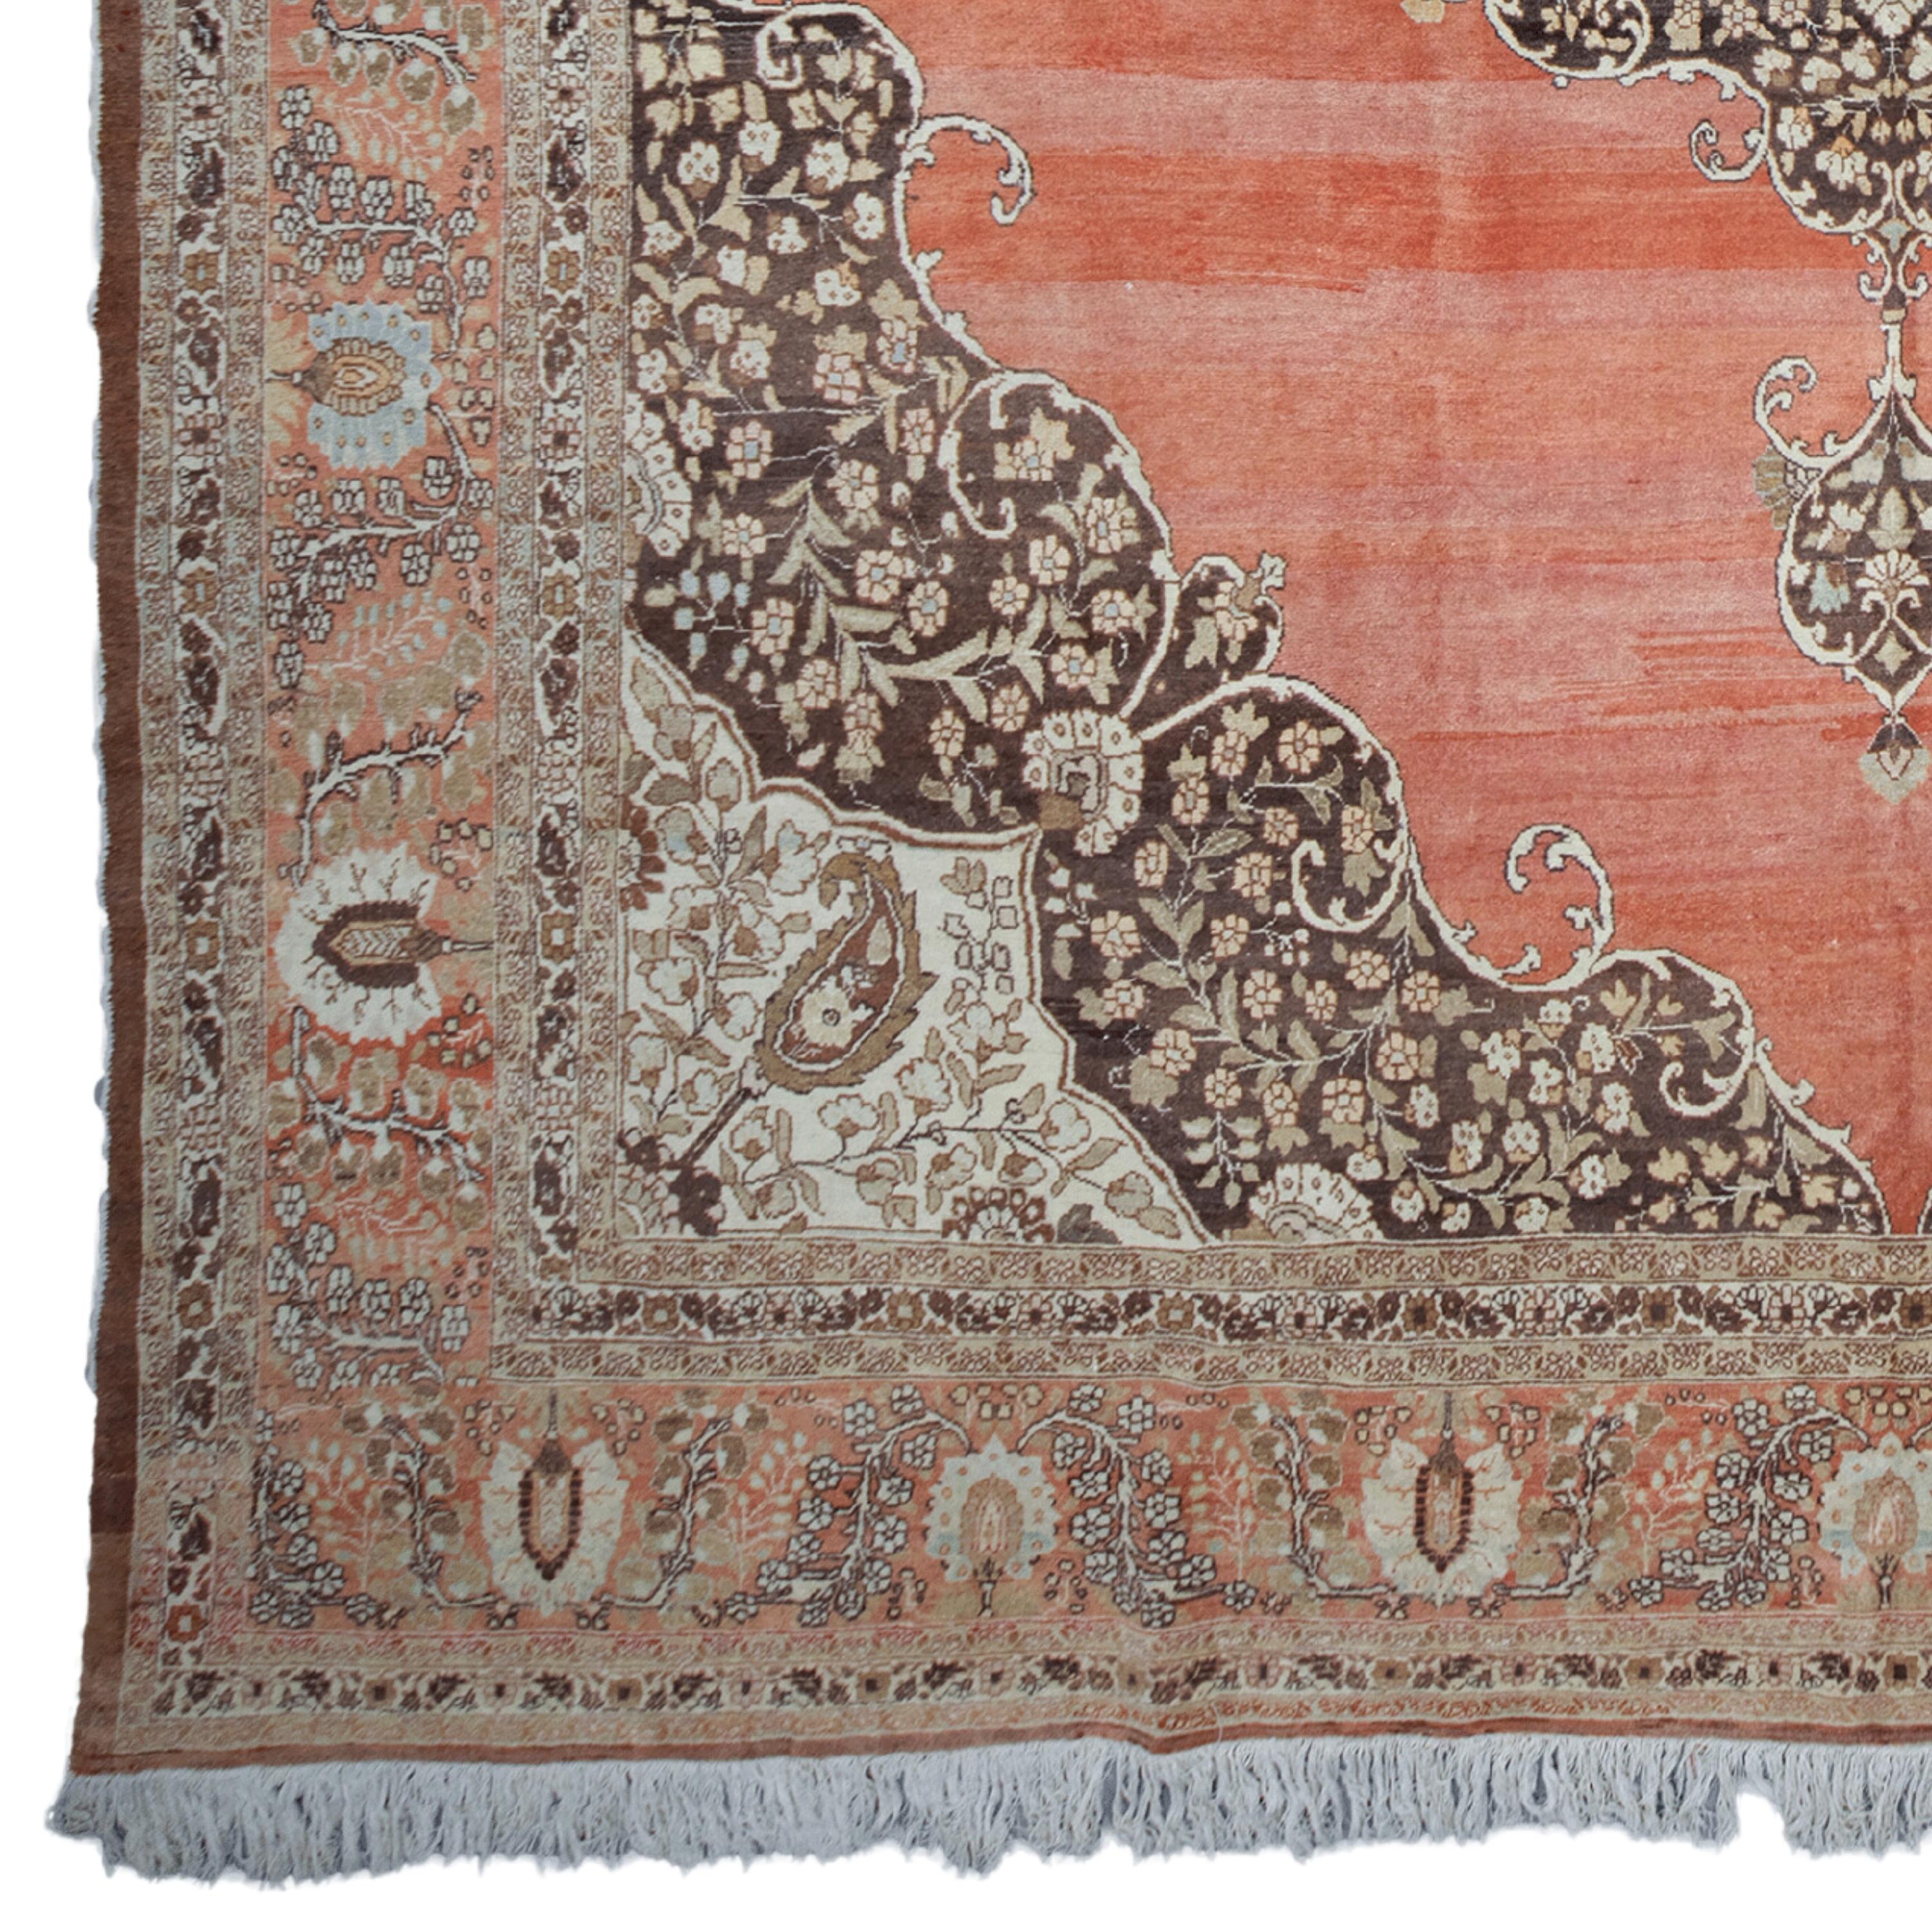 This magnificent 19th century Tabriz rug is an excellent choice for antique collectors and those with great aesthetic taste. With its rich red tones and detailed embroidery, this rug adds a sophisticated touch to any room. This work from the Ottoman